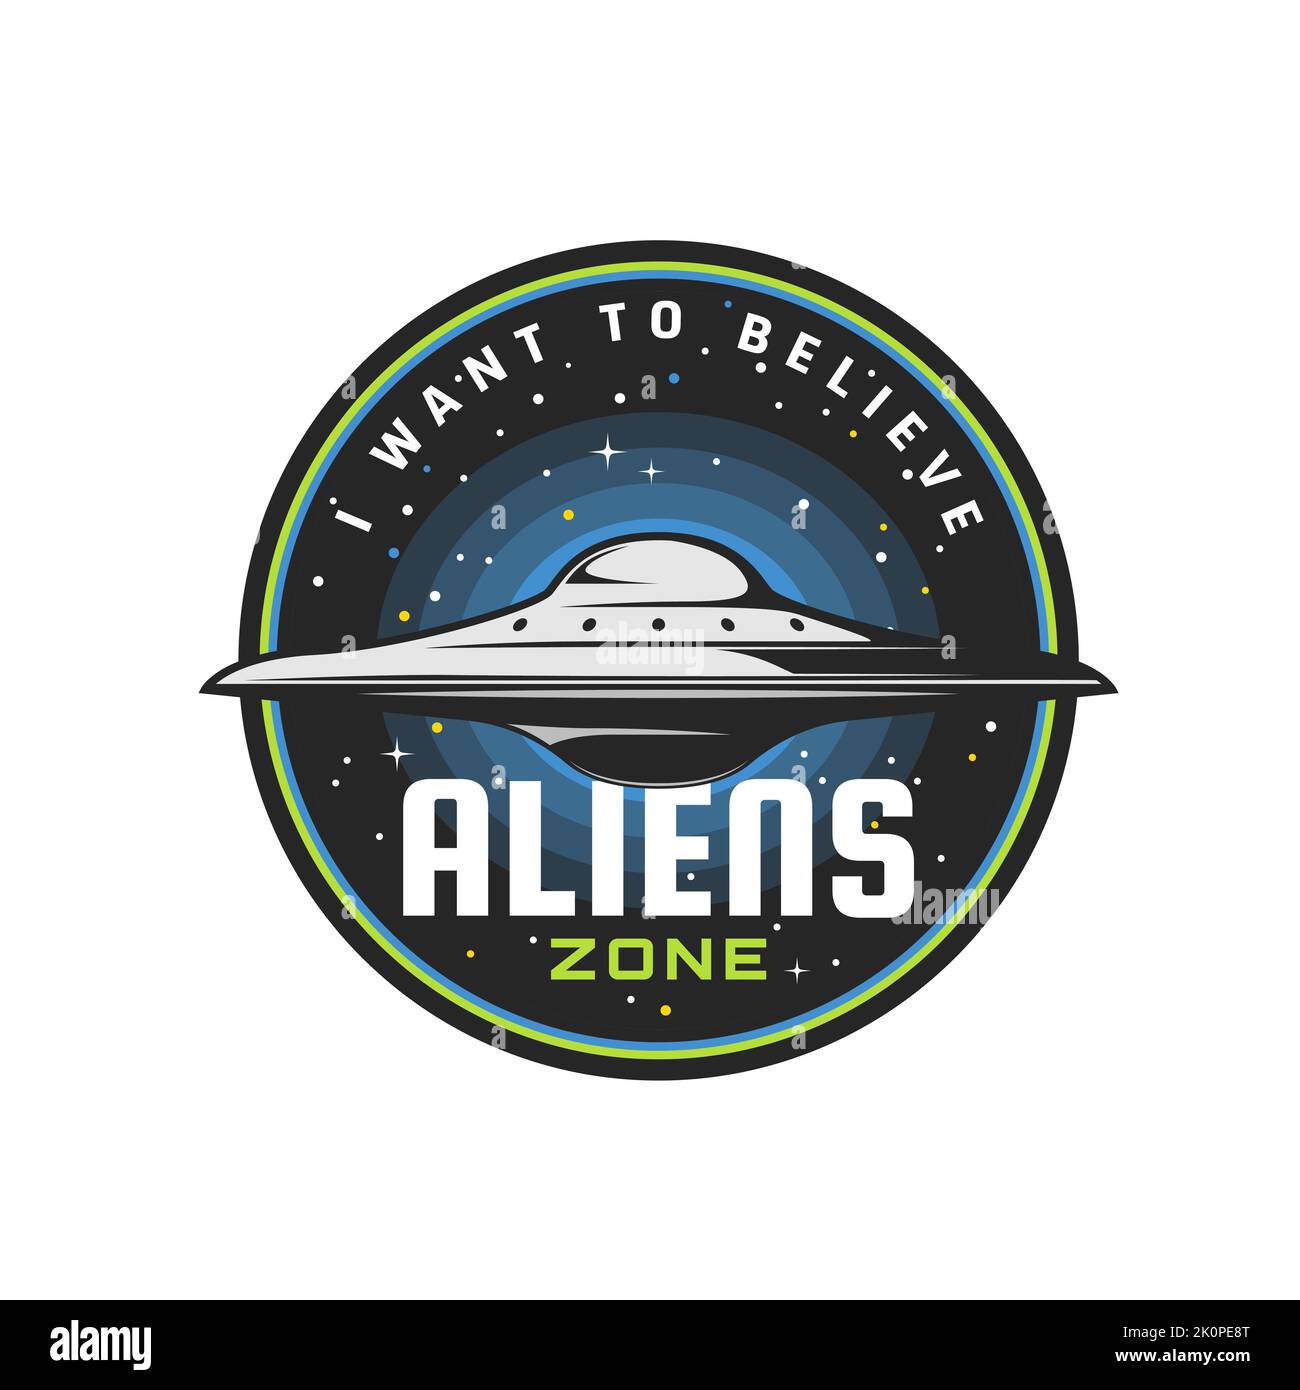 Aliens zone, UFO icon of martians or extraterrestrial area, vector emblem. Alien activity and UFO conspiracy theory sign with I want to believe slogan, martian abduction and paranormal activity area Stock Vector